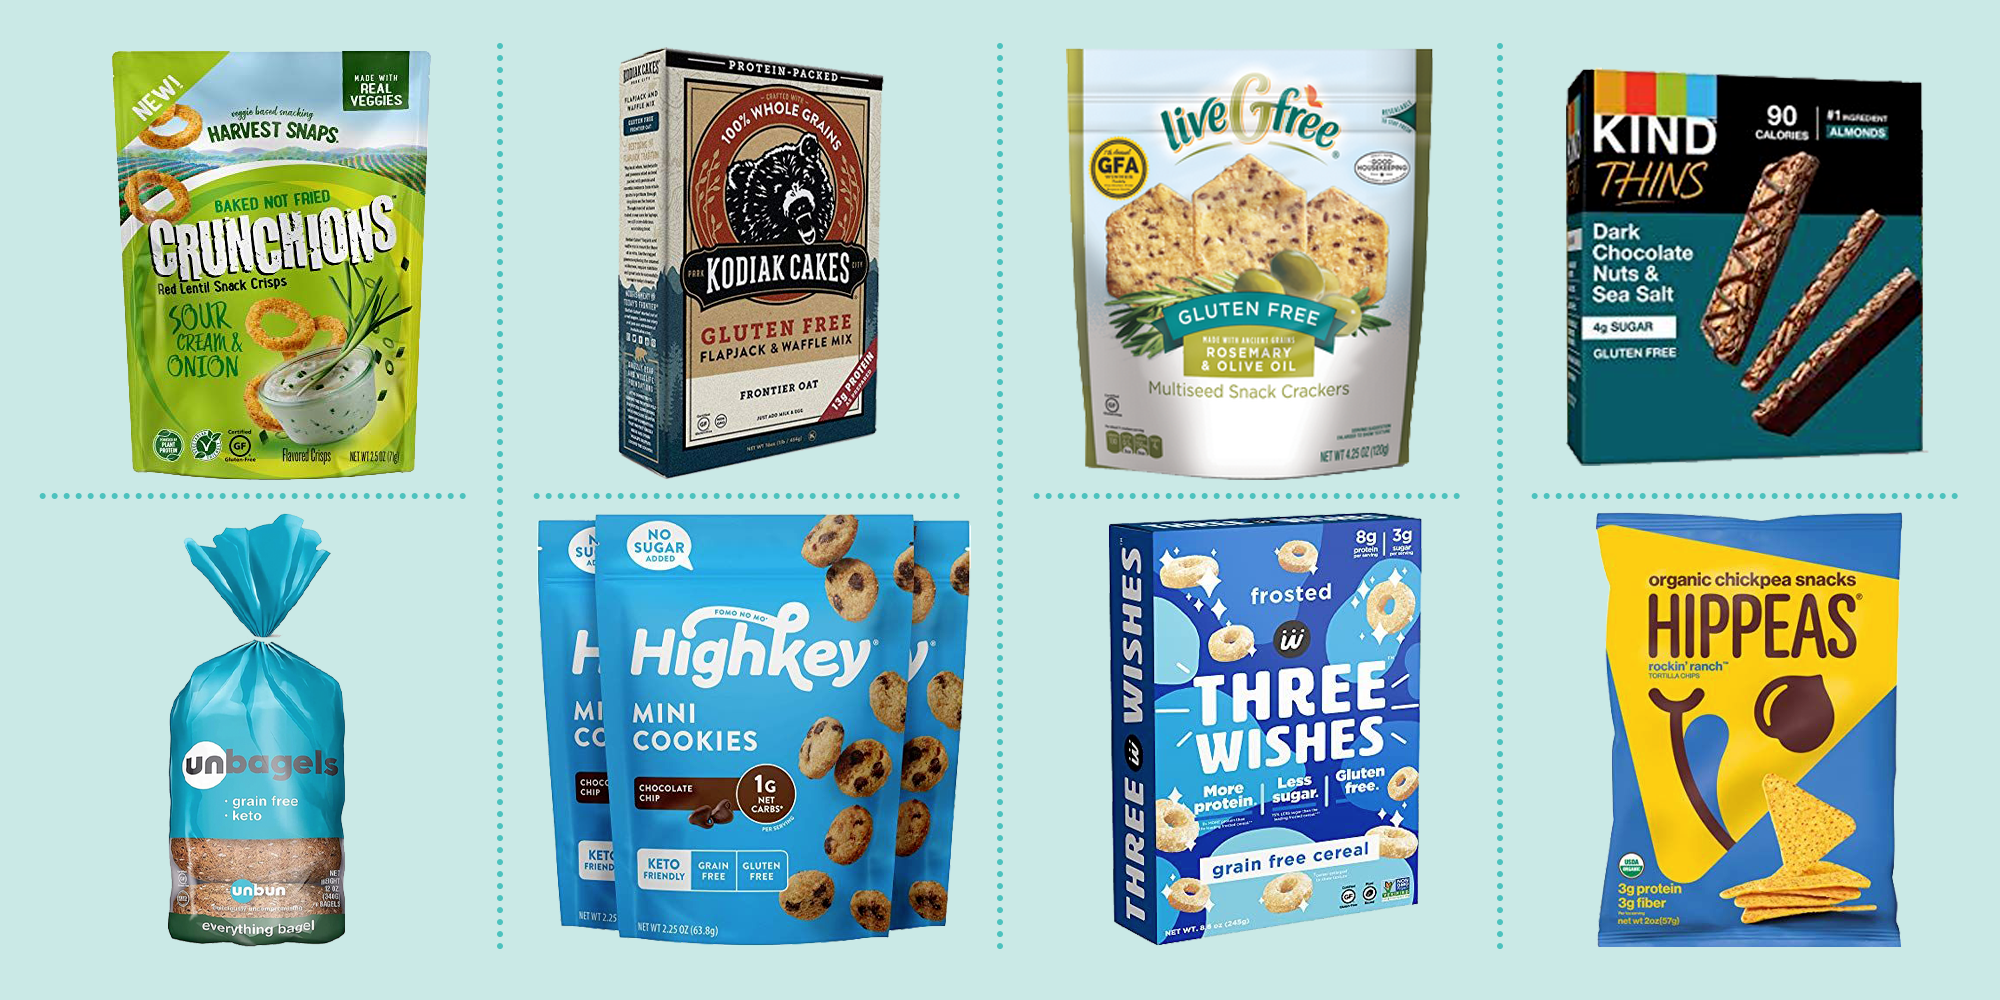 Discounted gluten-free products